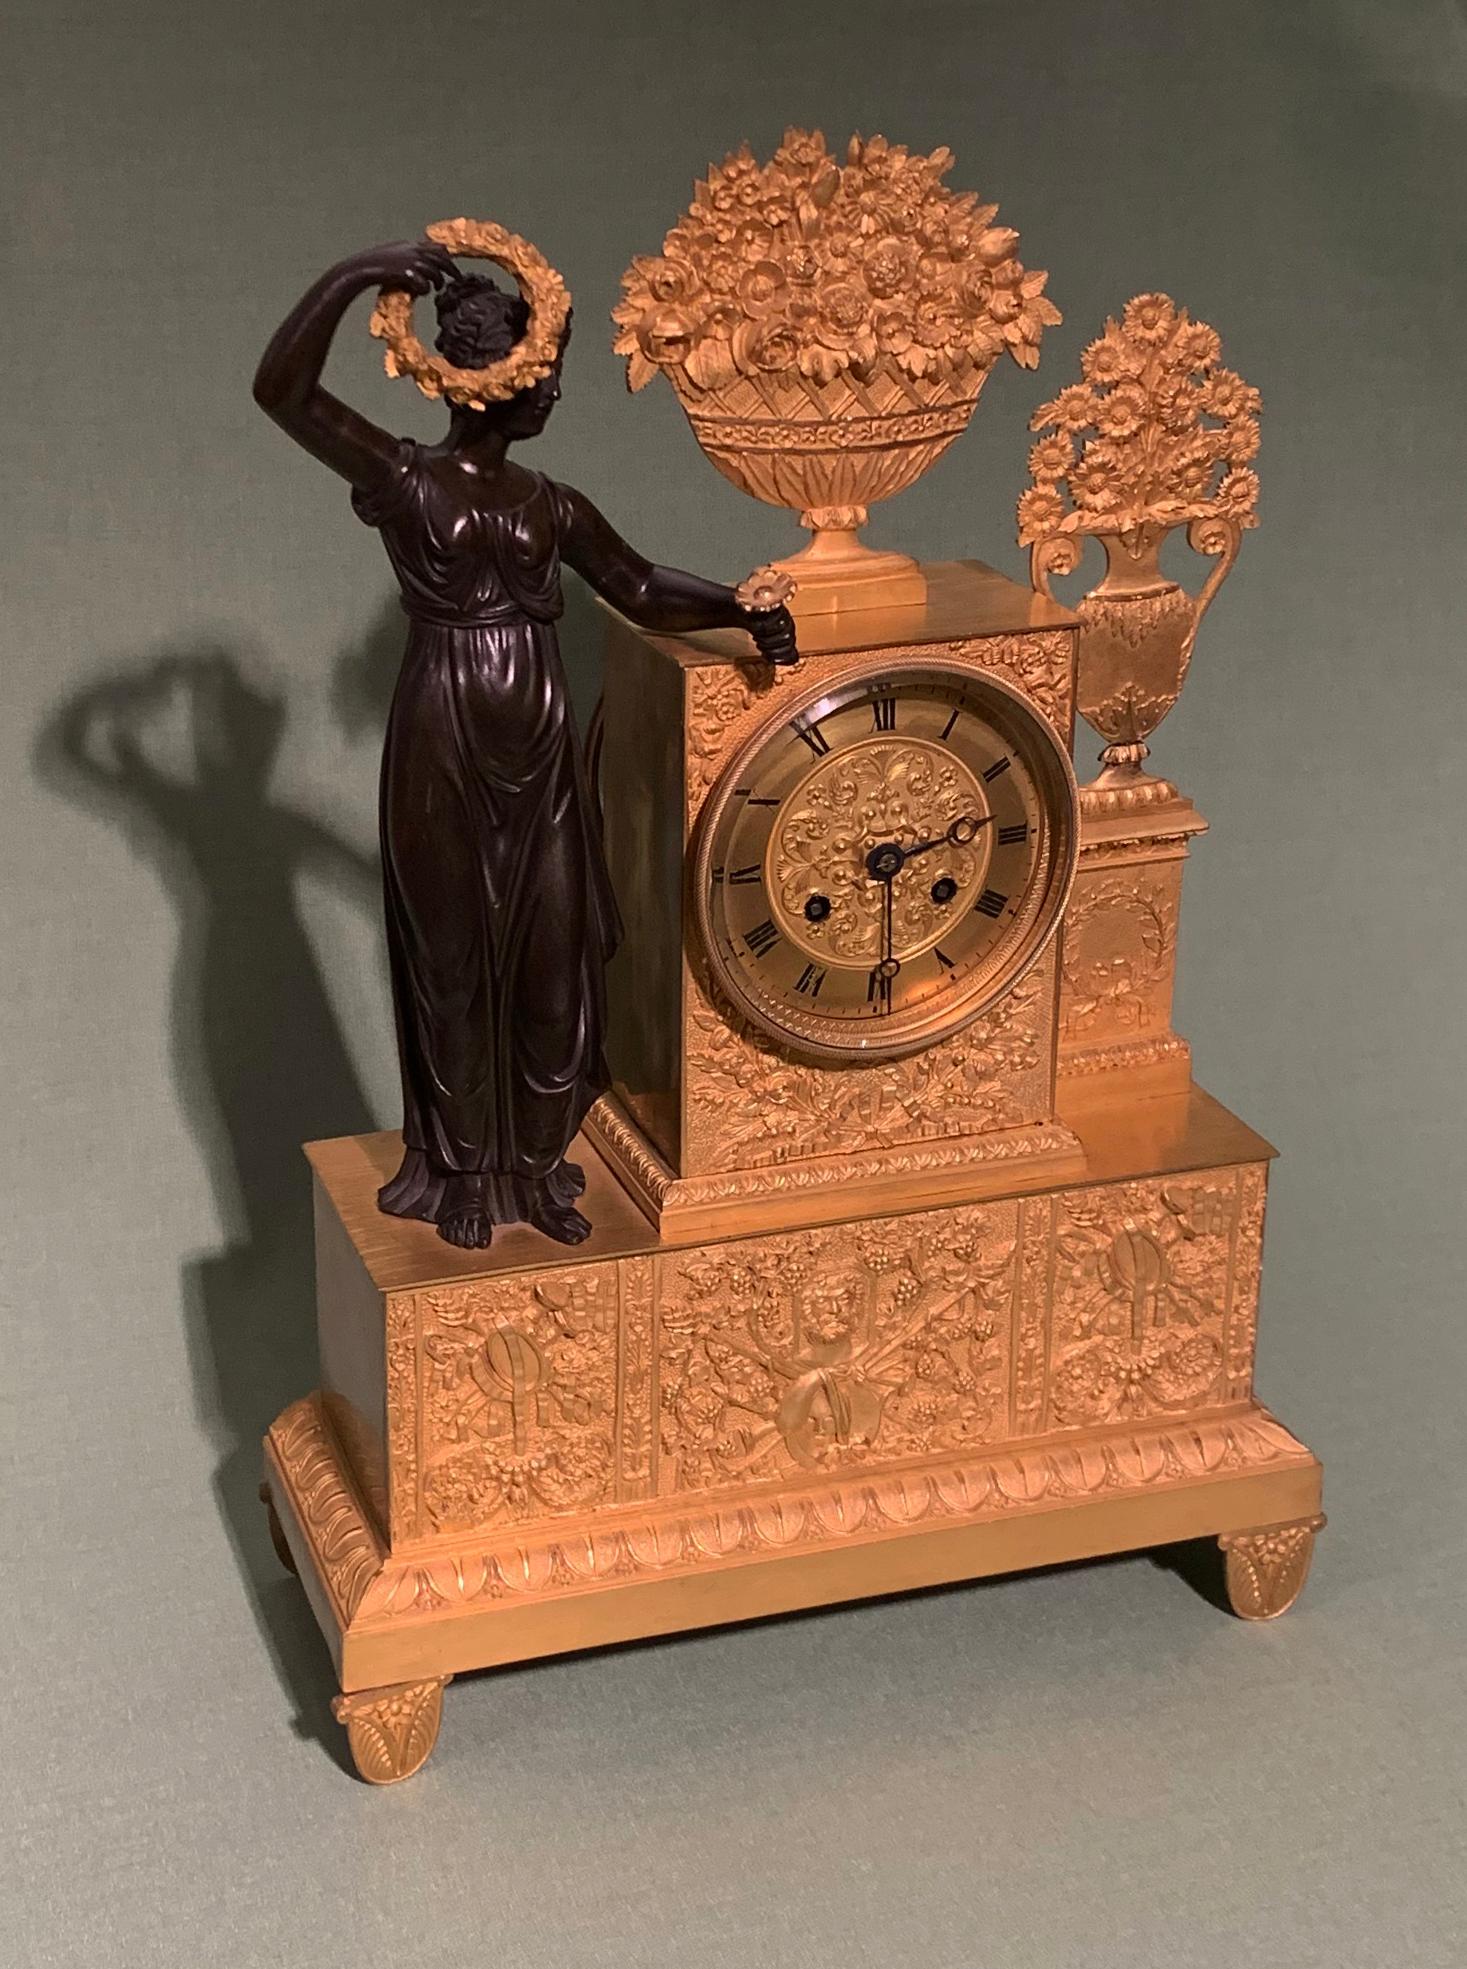 An early 19th century French eight day silk-suspension, striking clock, contained in ormolu case mounted with vases and urns of flowers with well-cast bronze figure of a muse holding a wreath of flowers, all supported on plinth engraved with central